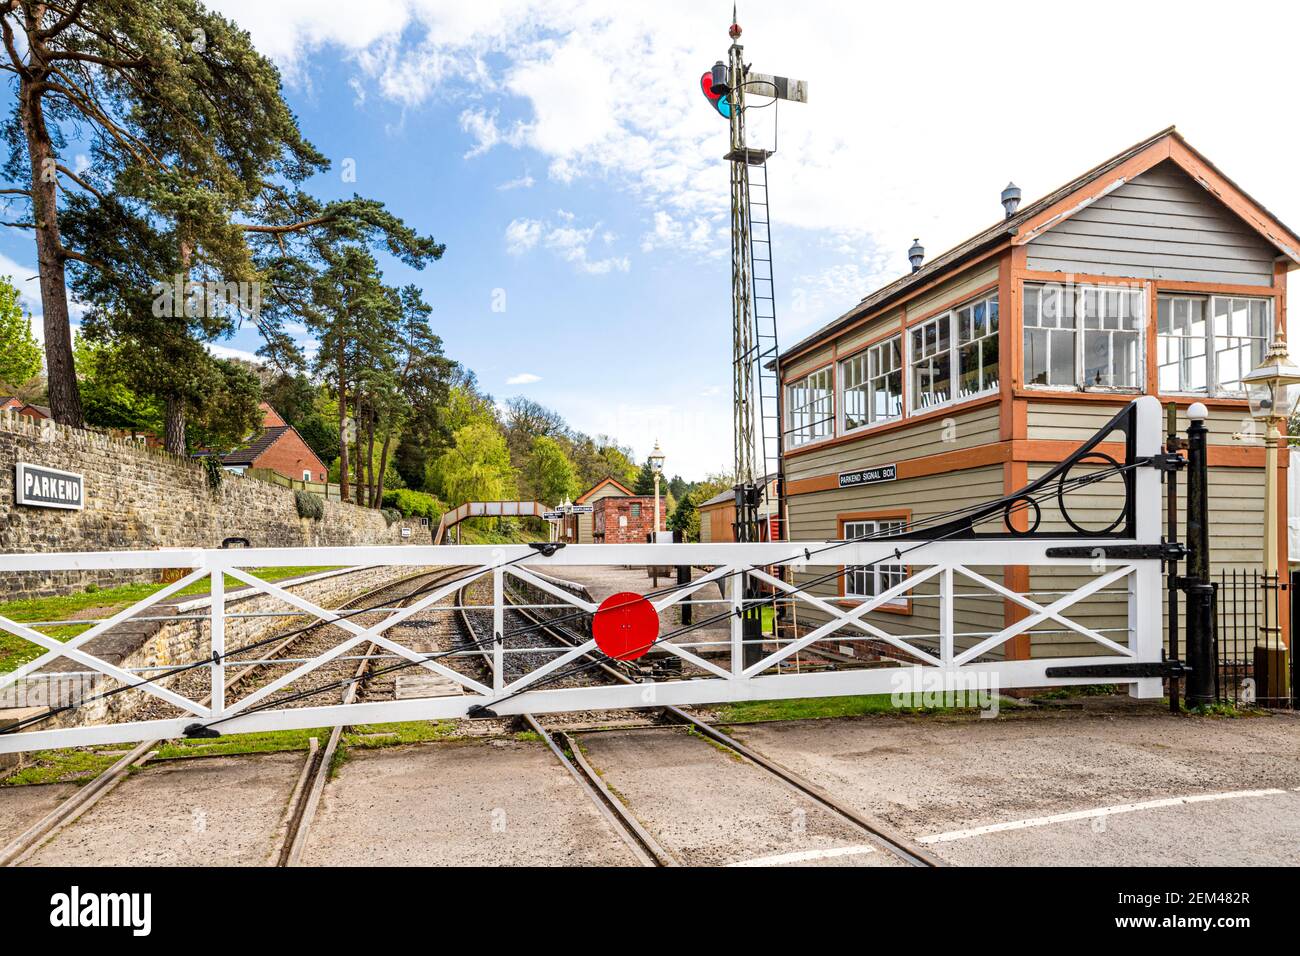 Parkend Station on the Dean Forest Railway in the Forest of Dean at Parkend, Gloucestershire UK Stock Photo